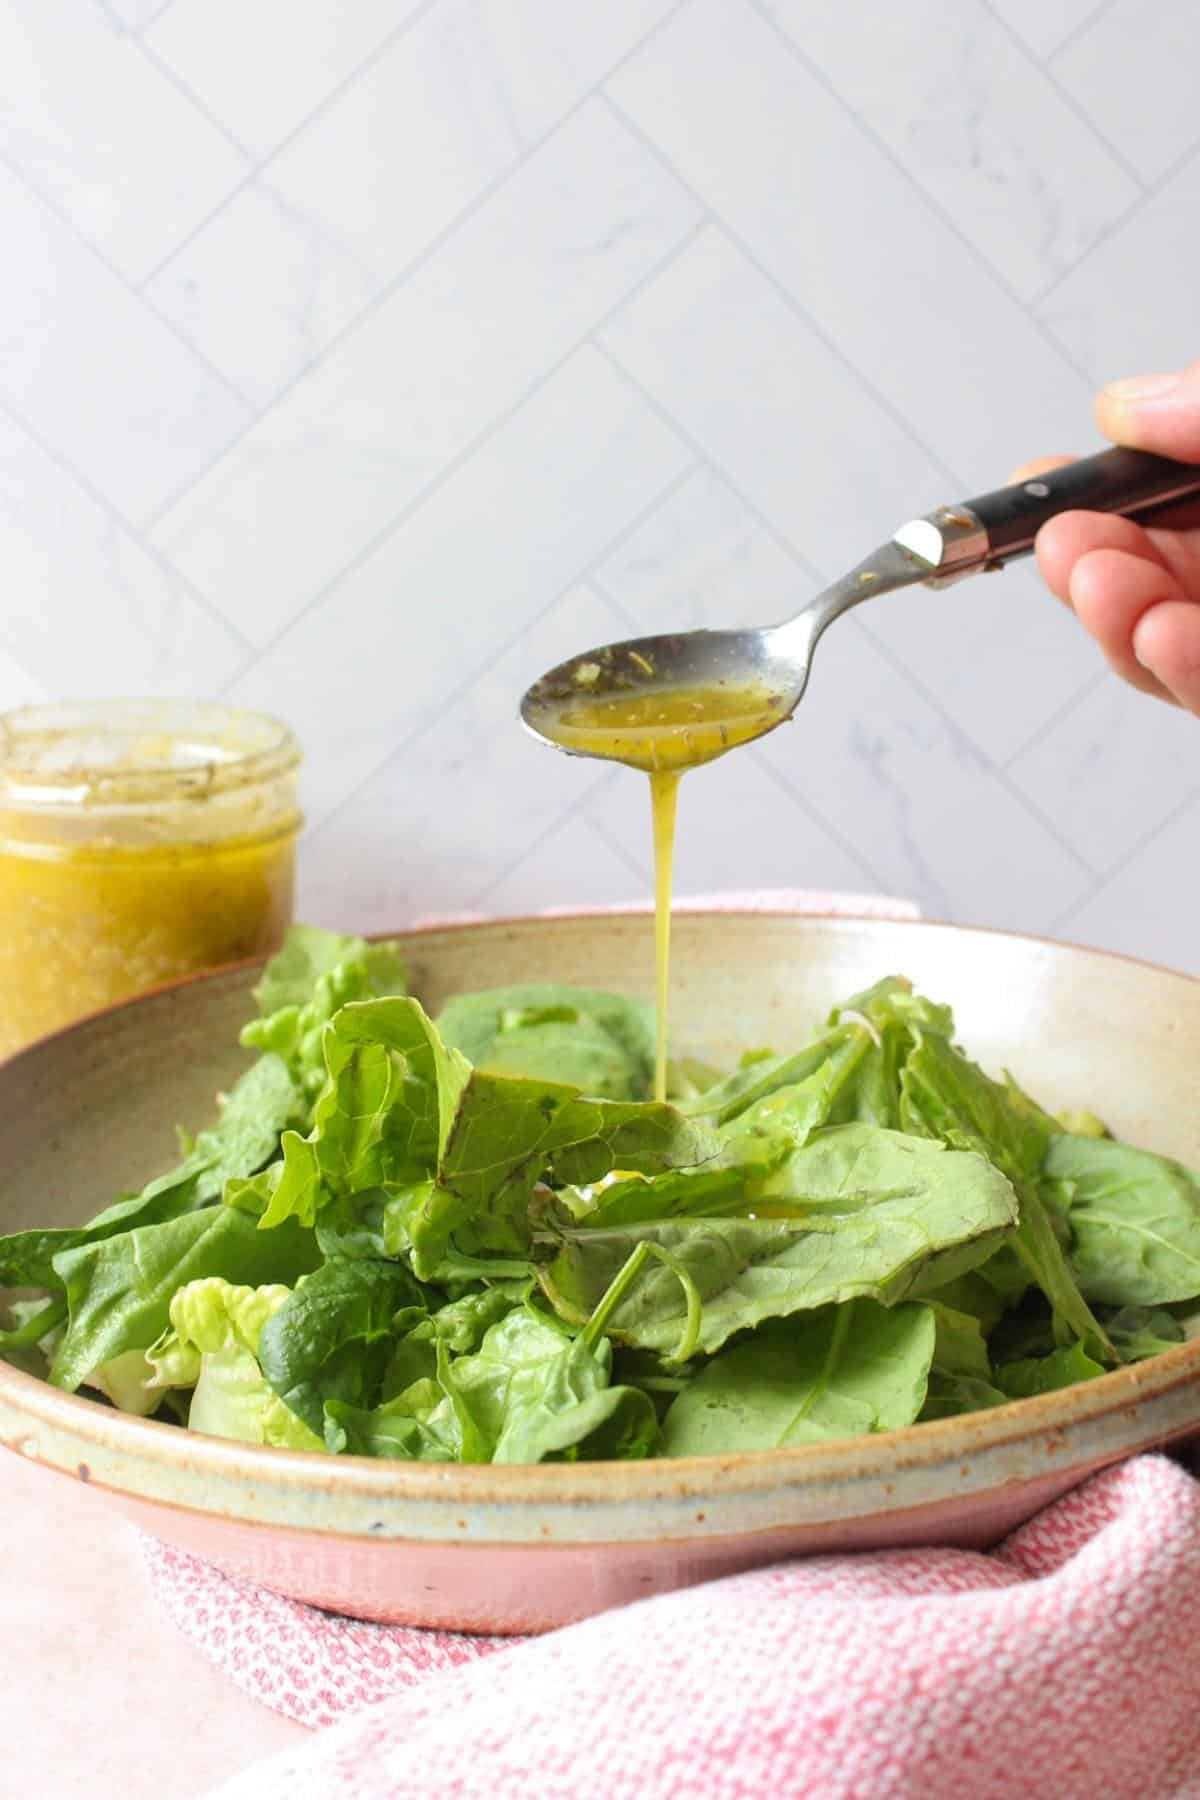 A spoon drizzling vegan Italian dressing over a bowl of lettuce leaves.